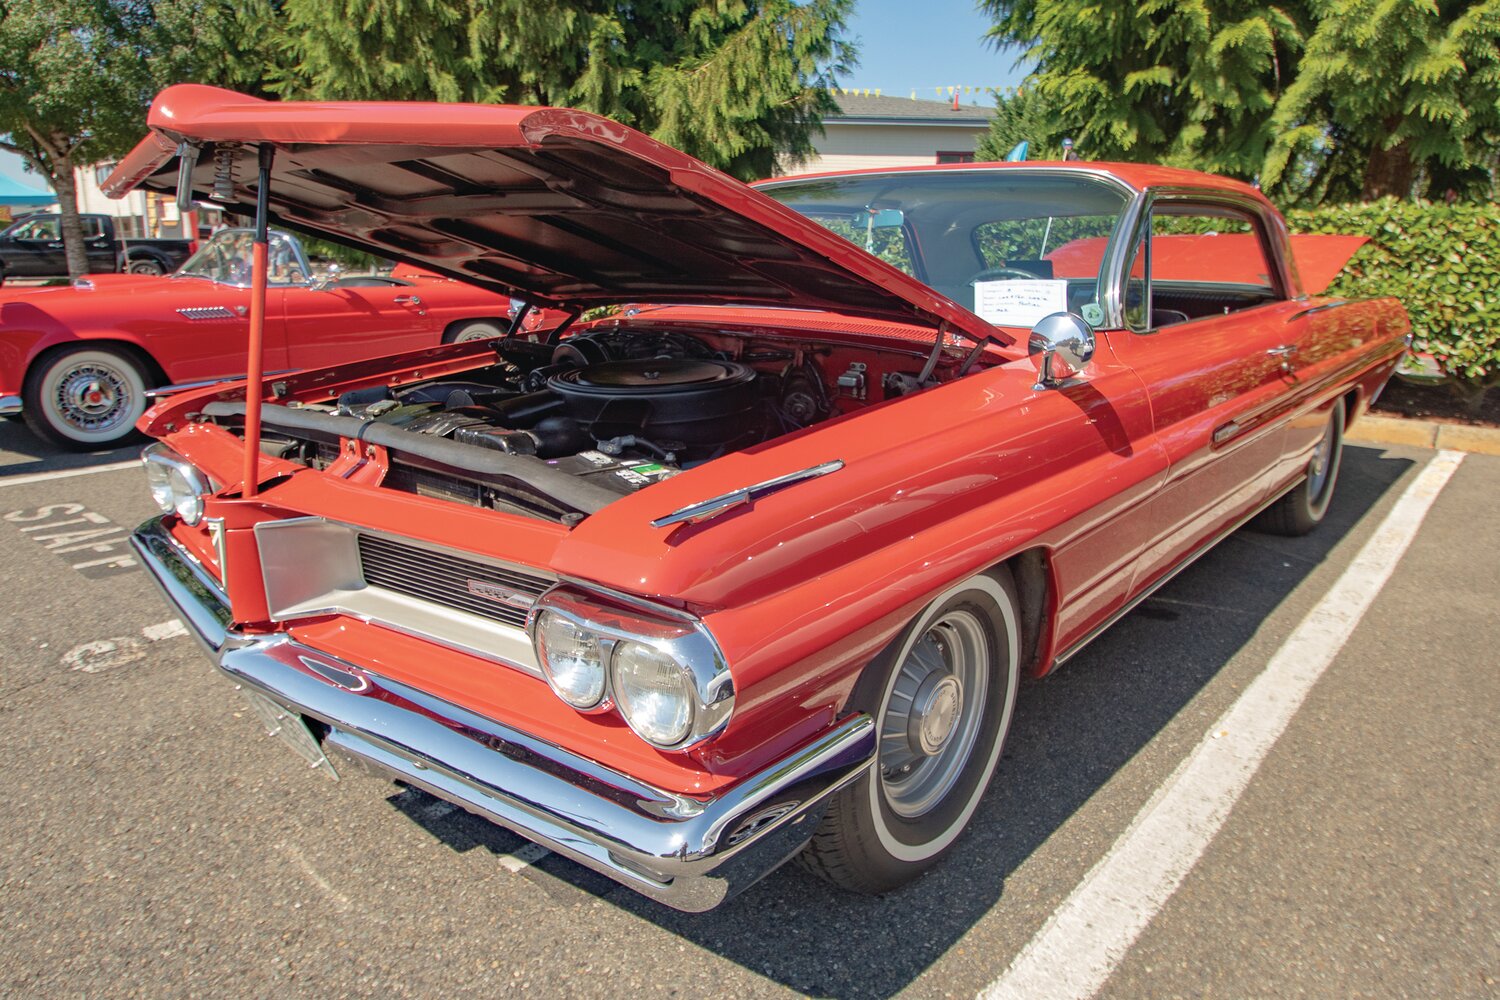 A 1962 Pontiac Grand Prix is displayed outside of Yelm High School for the Yelm FFA Alumni Association car show on Saturday, Sept. 9.